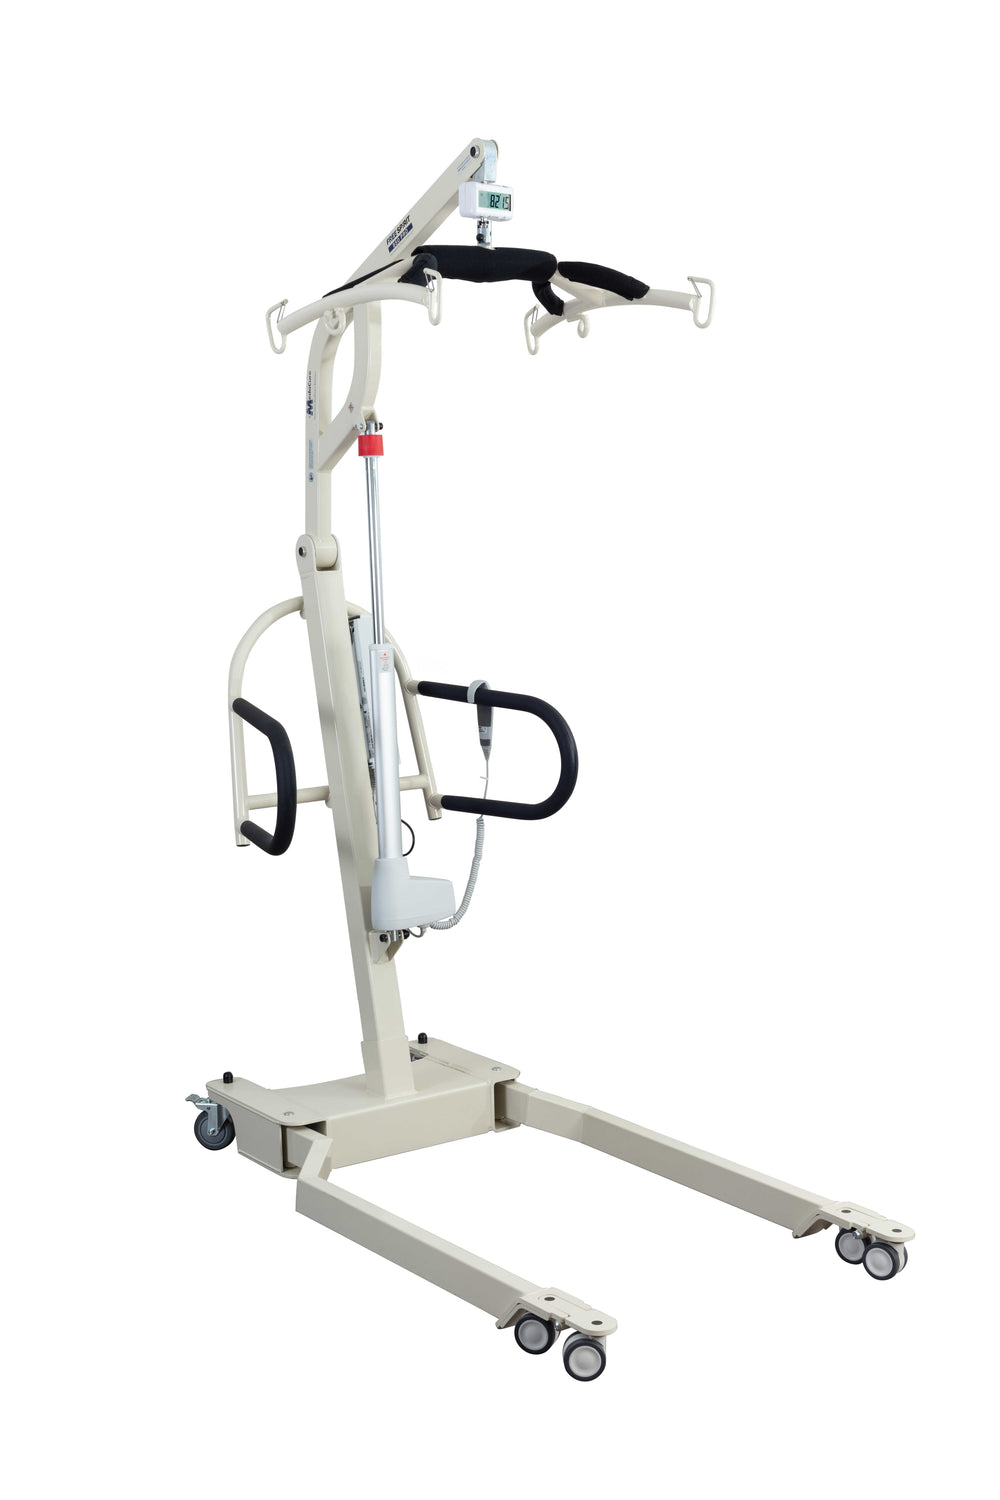 MedaCure FS850-T Patient Lift Free Spirit True Bariatric 850 lbs Capacity New